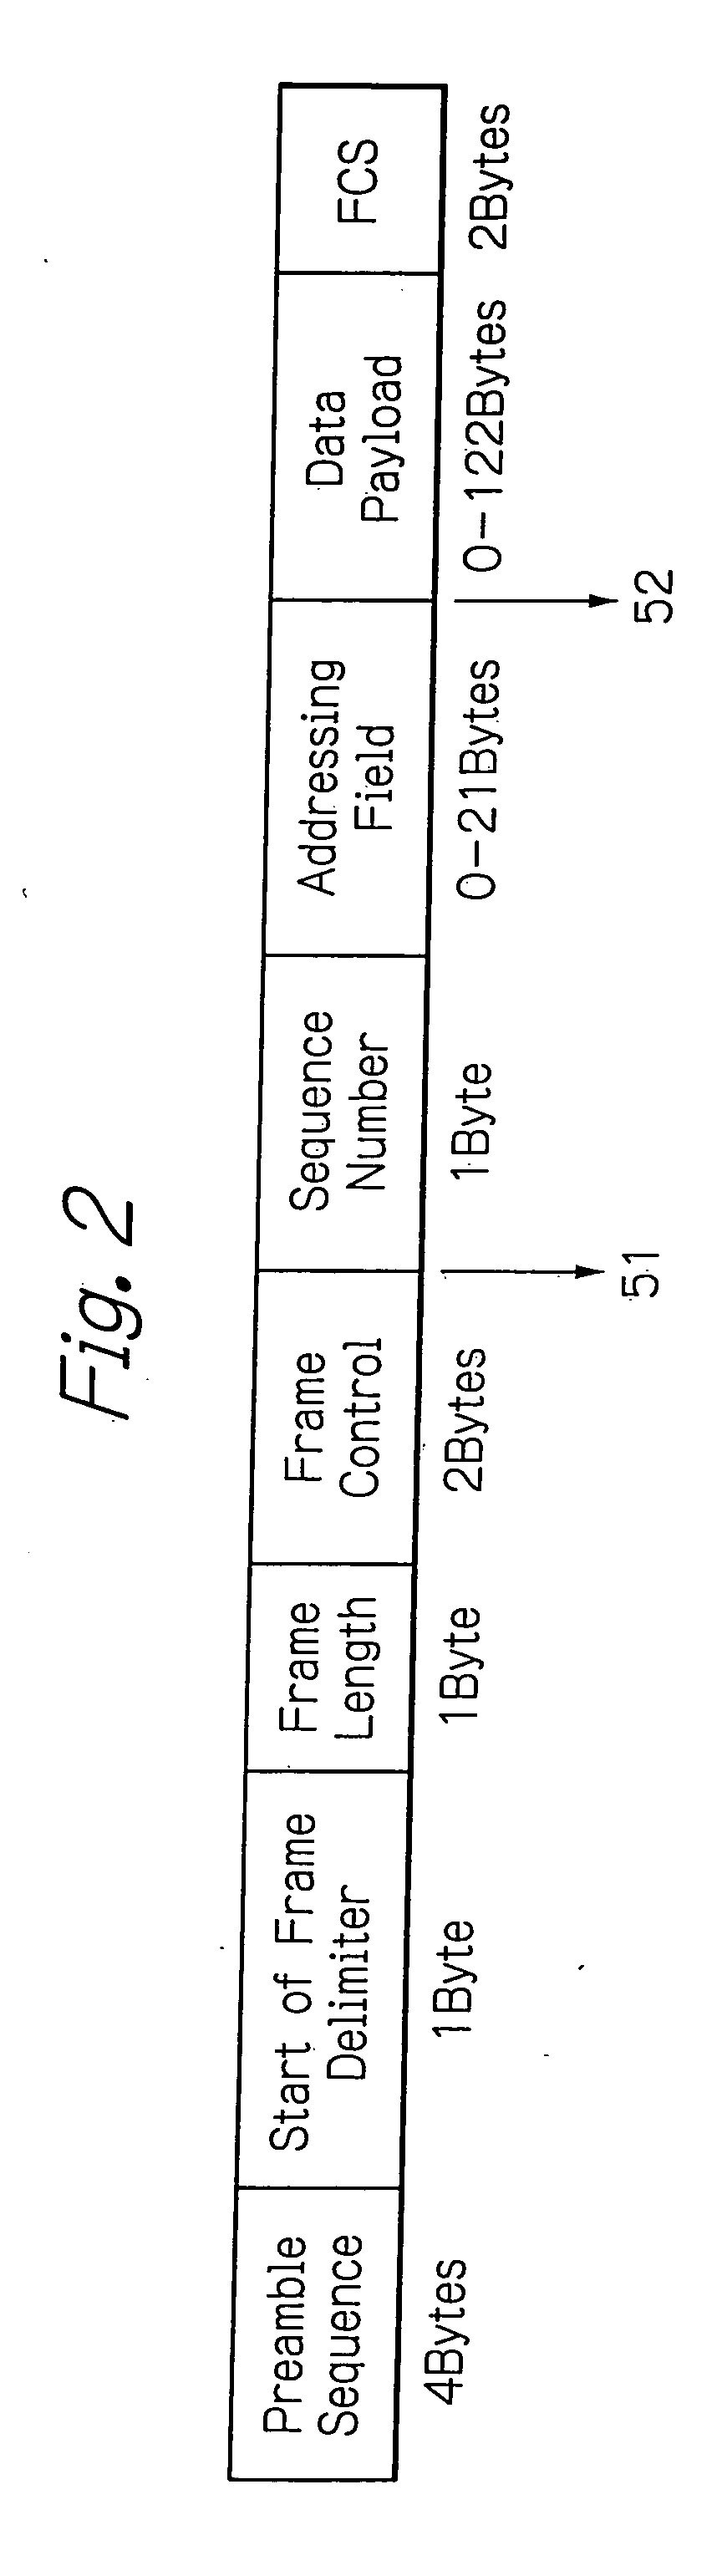 Radio frequency integrated circuit having a physical layer portion integrated therein